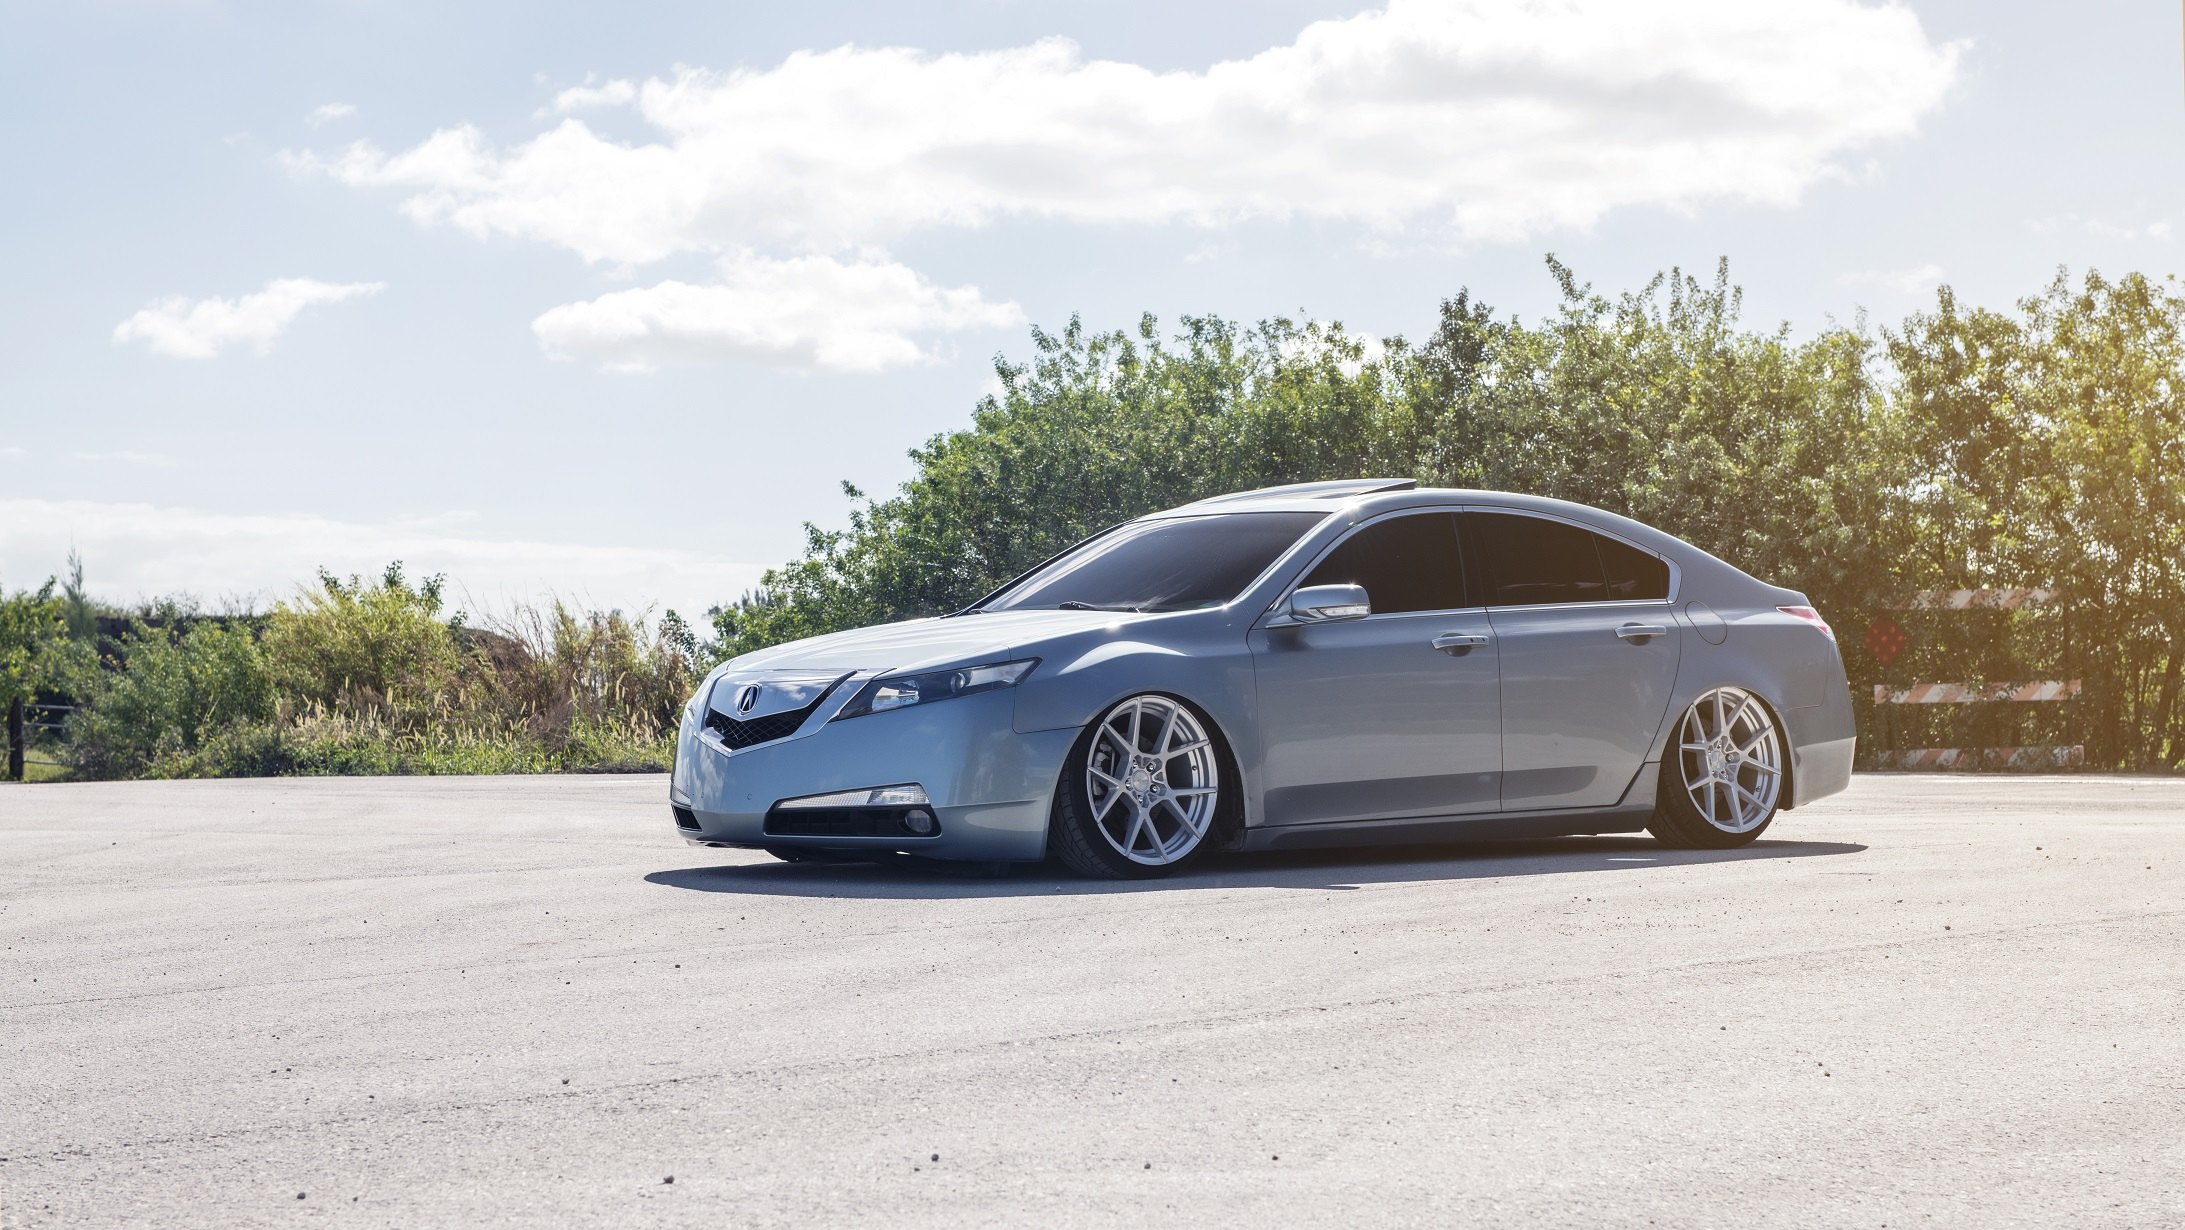 Gray Metallic Acura TL with Aftermarket Front Bumper - Photo by Rotiform